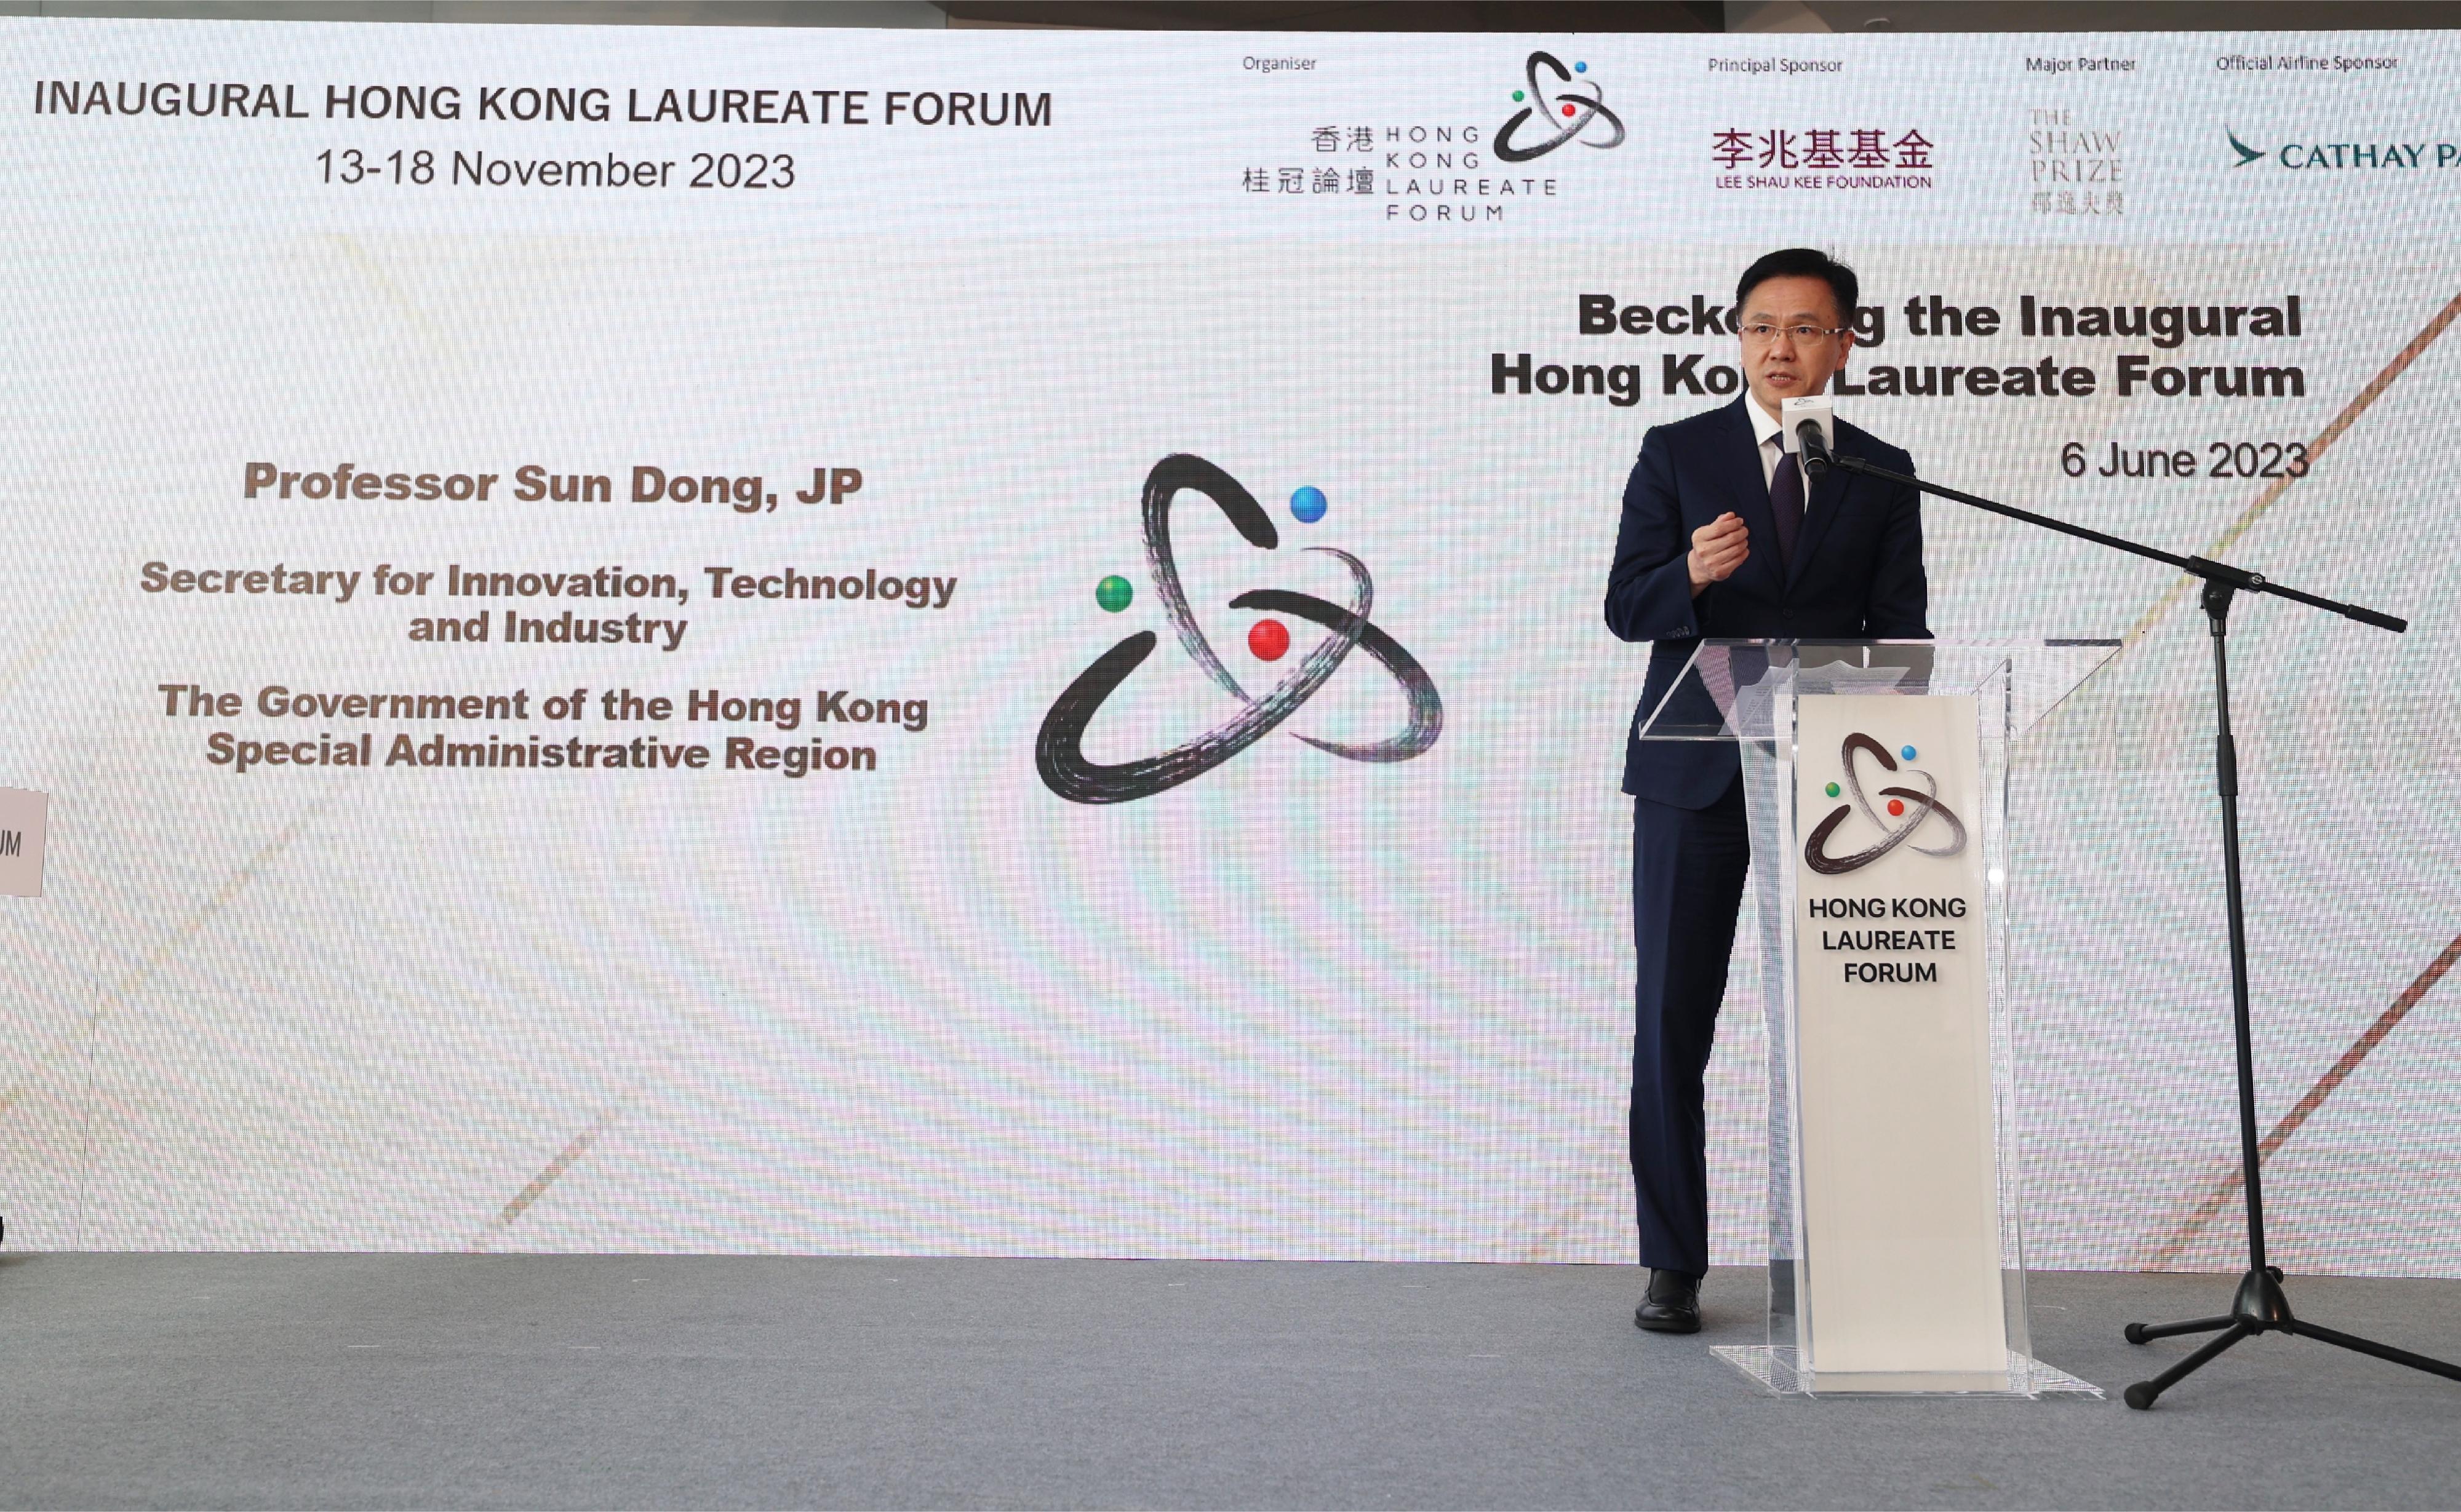 The Secretary for Innovation, Technology and Industry, Professor Sun Dong, speaks at the Beckoning the Inaugural Hong Kong Laureate Forum press conference today (June 6).